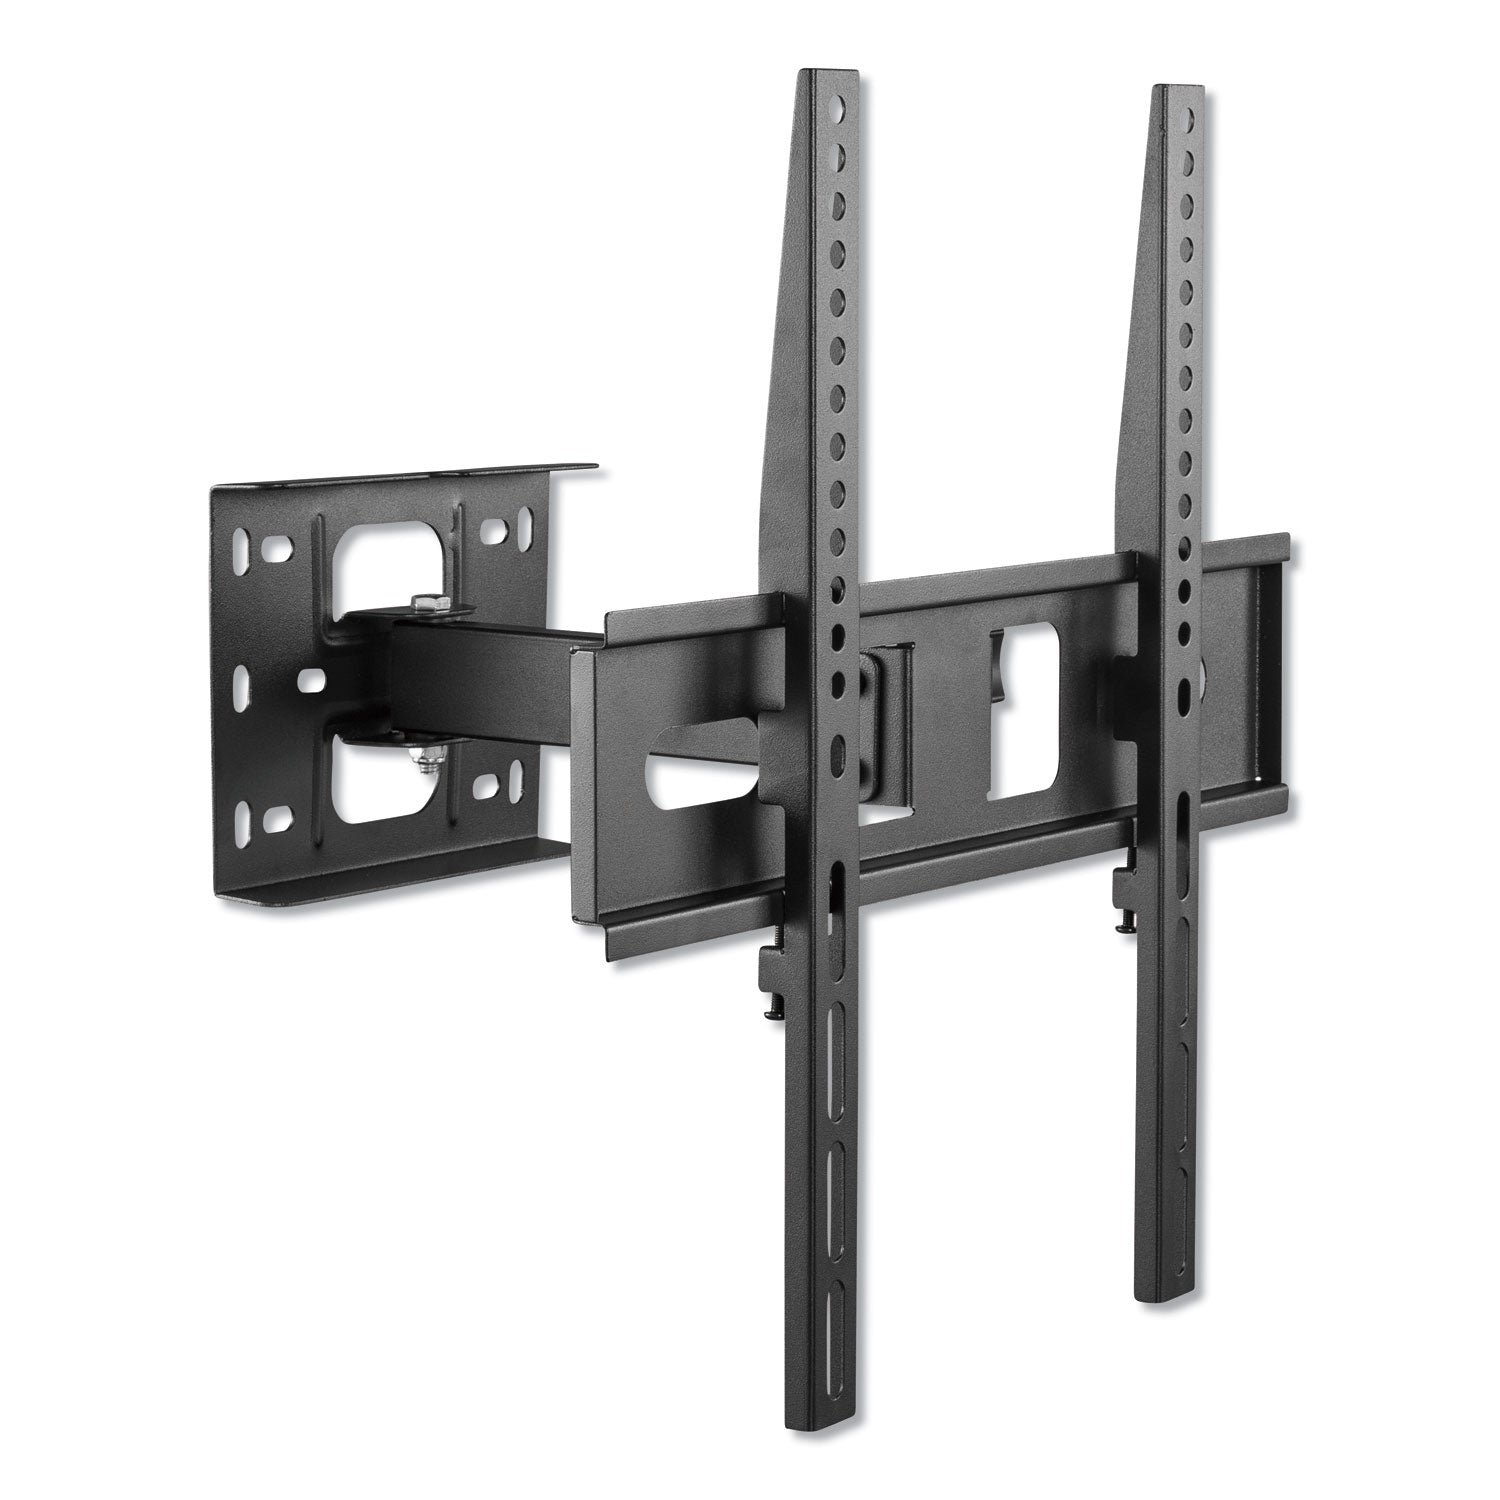 full-motion-tv-wall-mount-for-monitors-32-to-55-171w-x-98d-x-169h_ivr56100 - 2